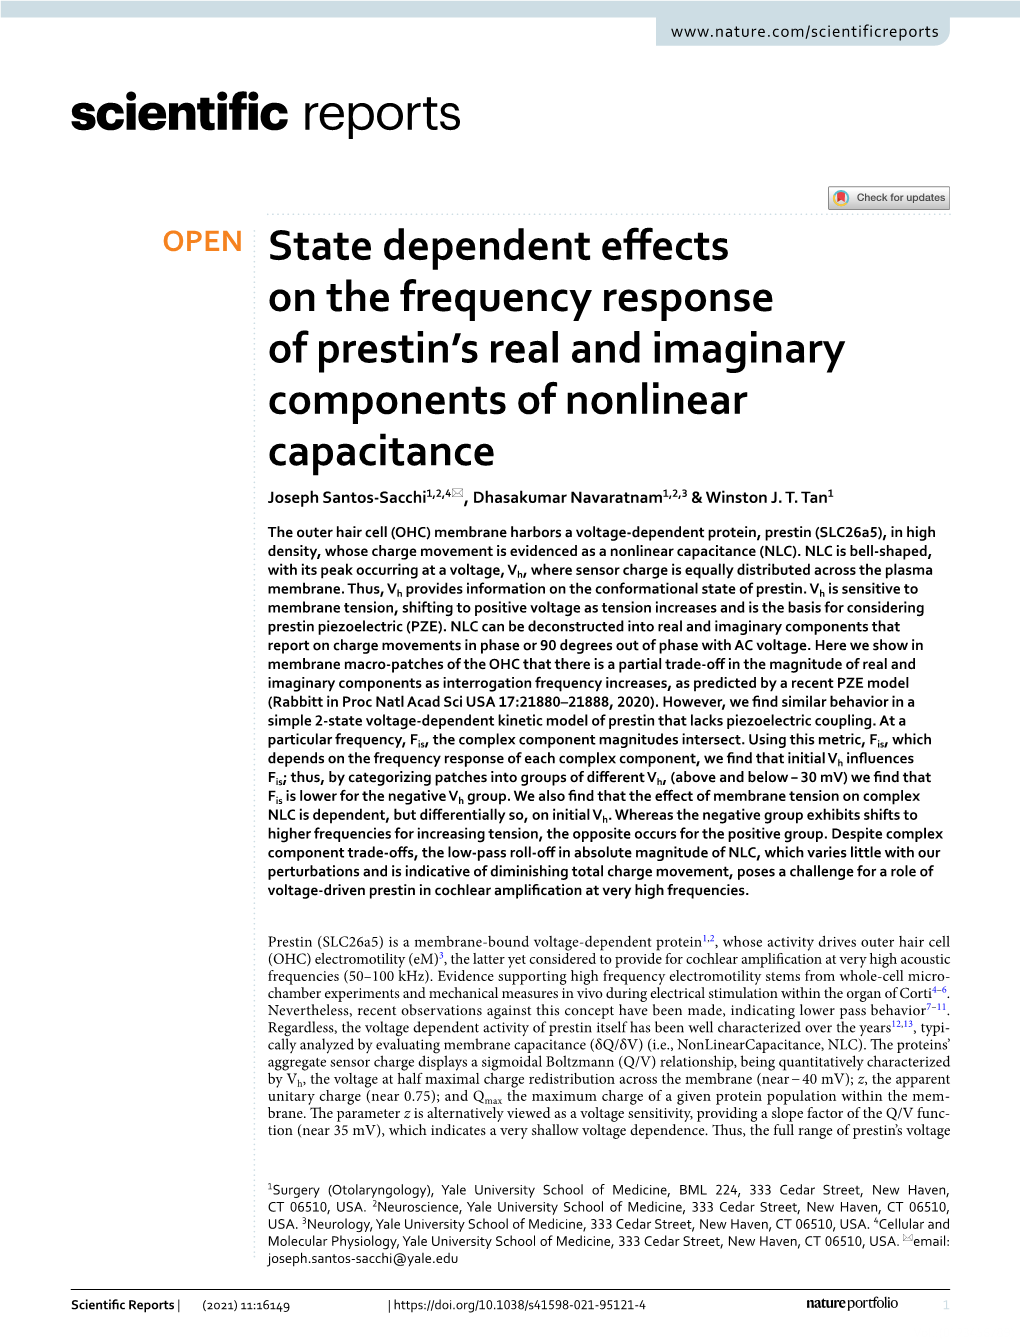 State Dependent Effects on the Frequency Response of Prestin's Real